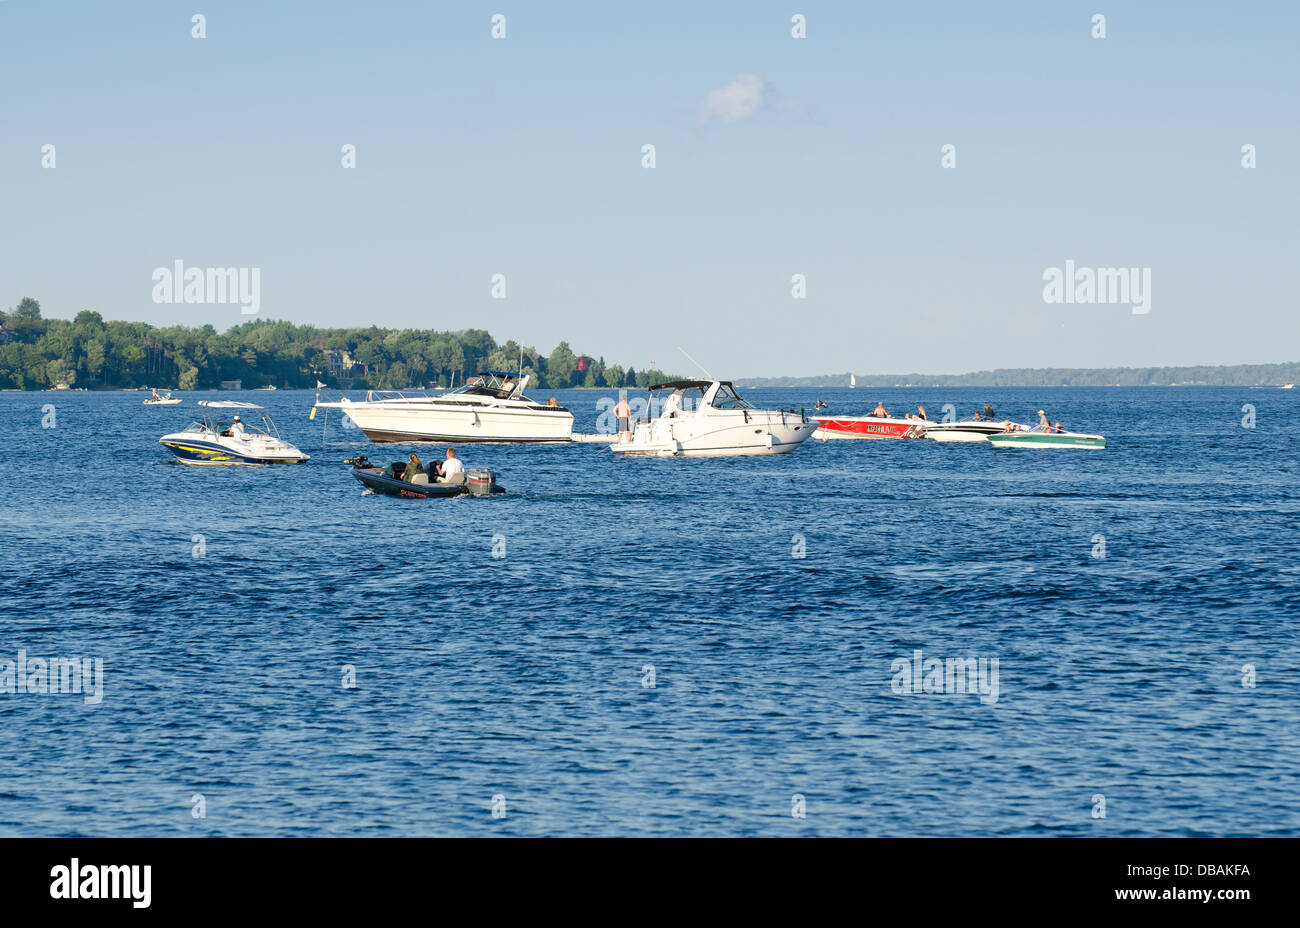 Boats on Kempenfelt Bay, Barrie, Ontario Stock Photo